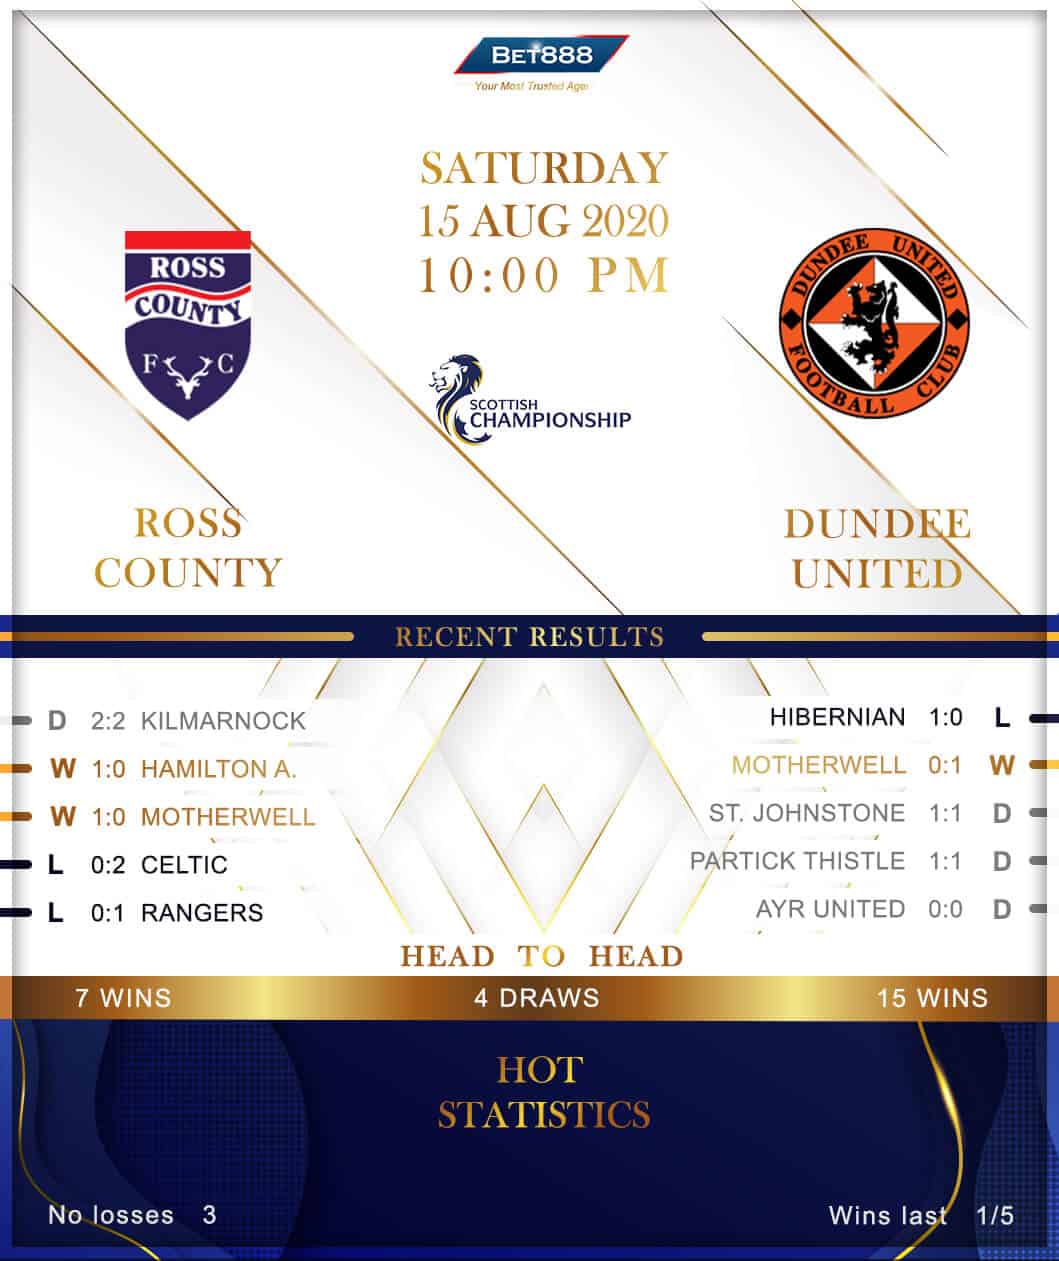 Ross County vs Dundee United 15/08/20